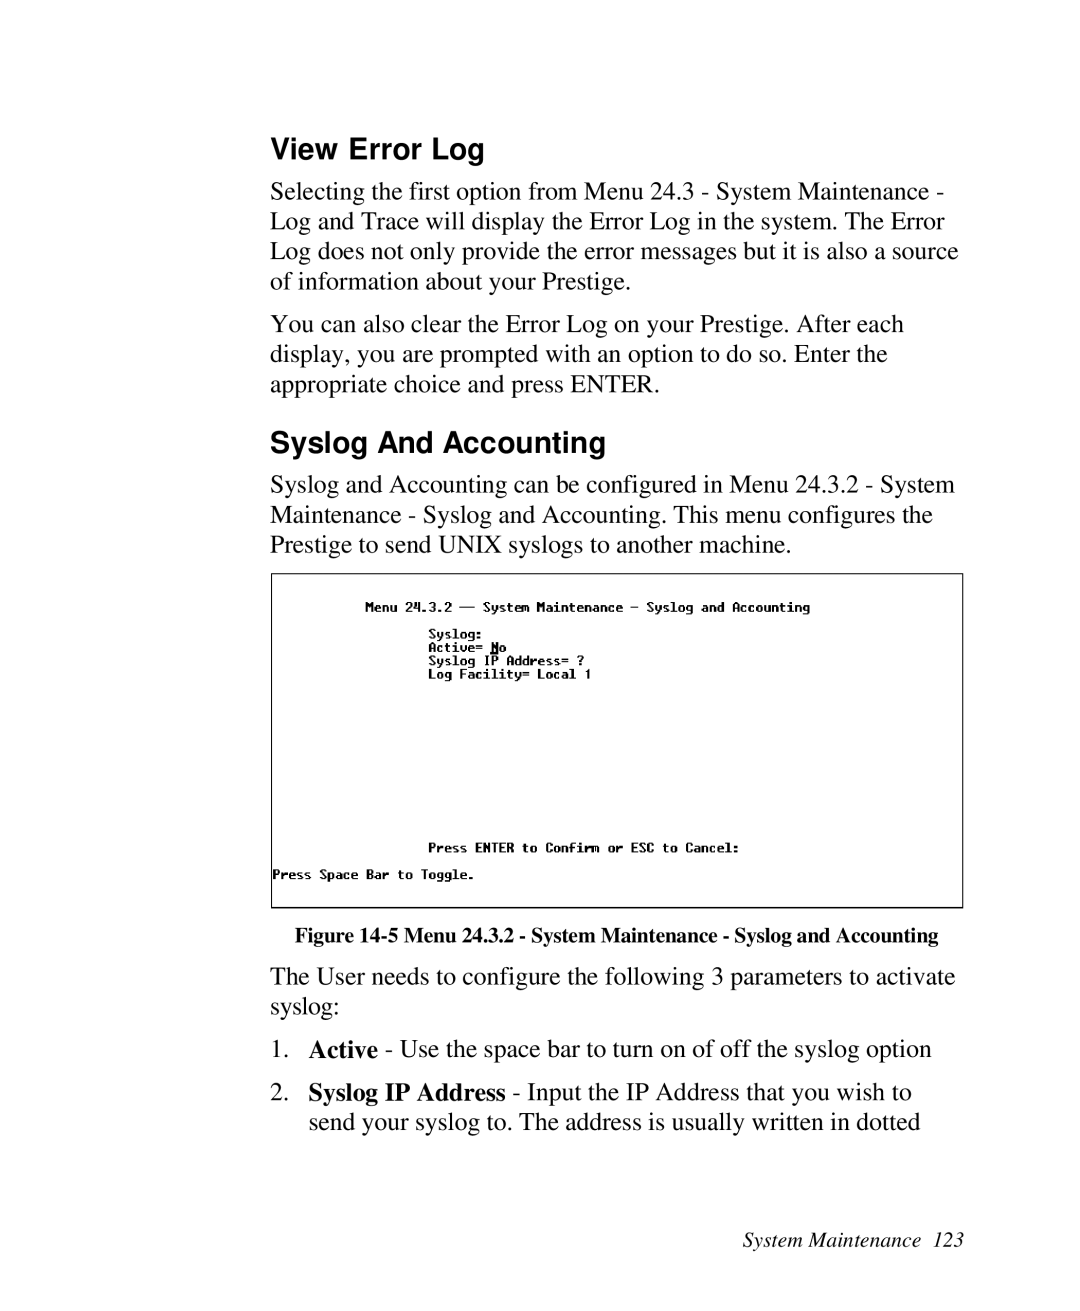 ZyXEL Communications Prestige 128 user manual View Error Log, Syslog And Accounting 